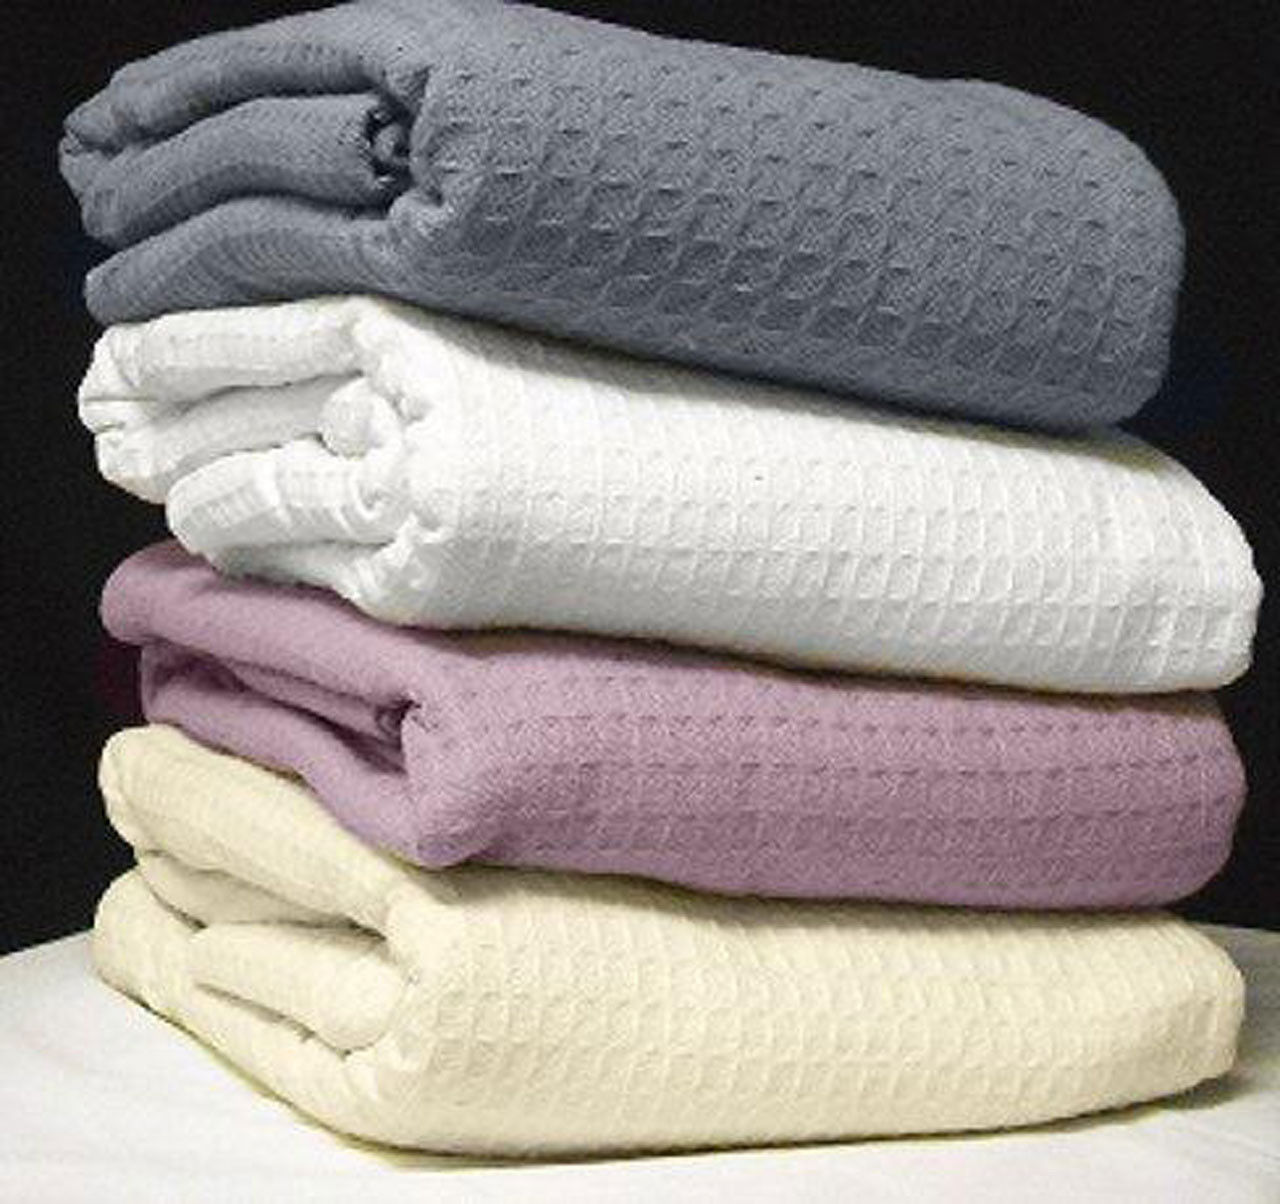 How does the Santa Clarita blanket retain its color, given it's a Santa Clara Cotton Thermal Blanket?